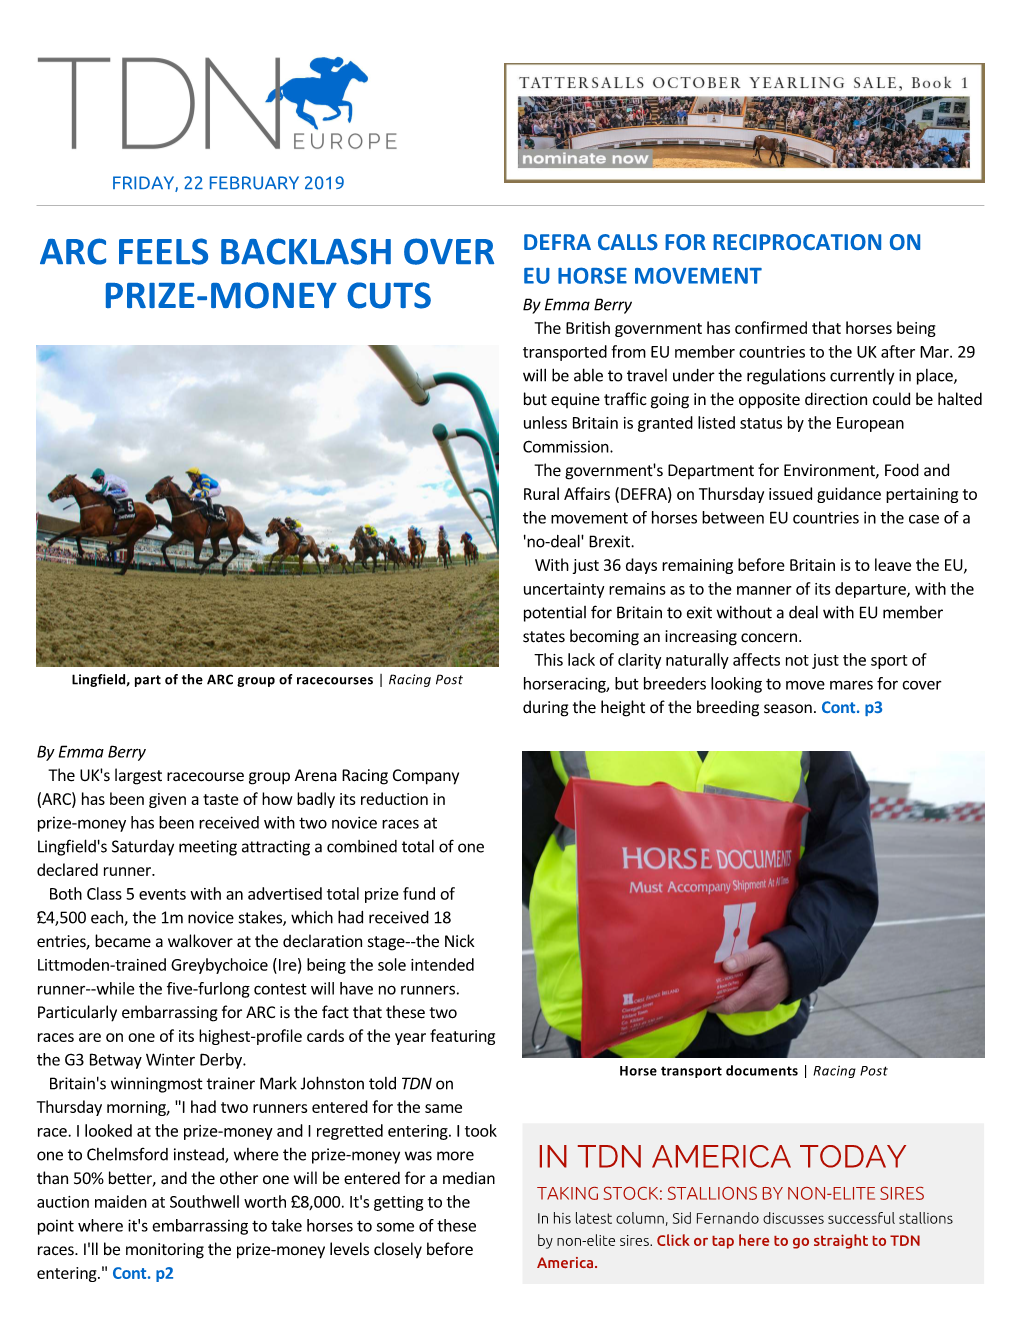 ARC Feels Backlash Over Prize-Money Cuts Cont